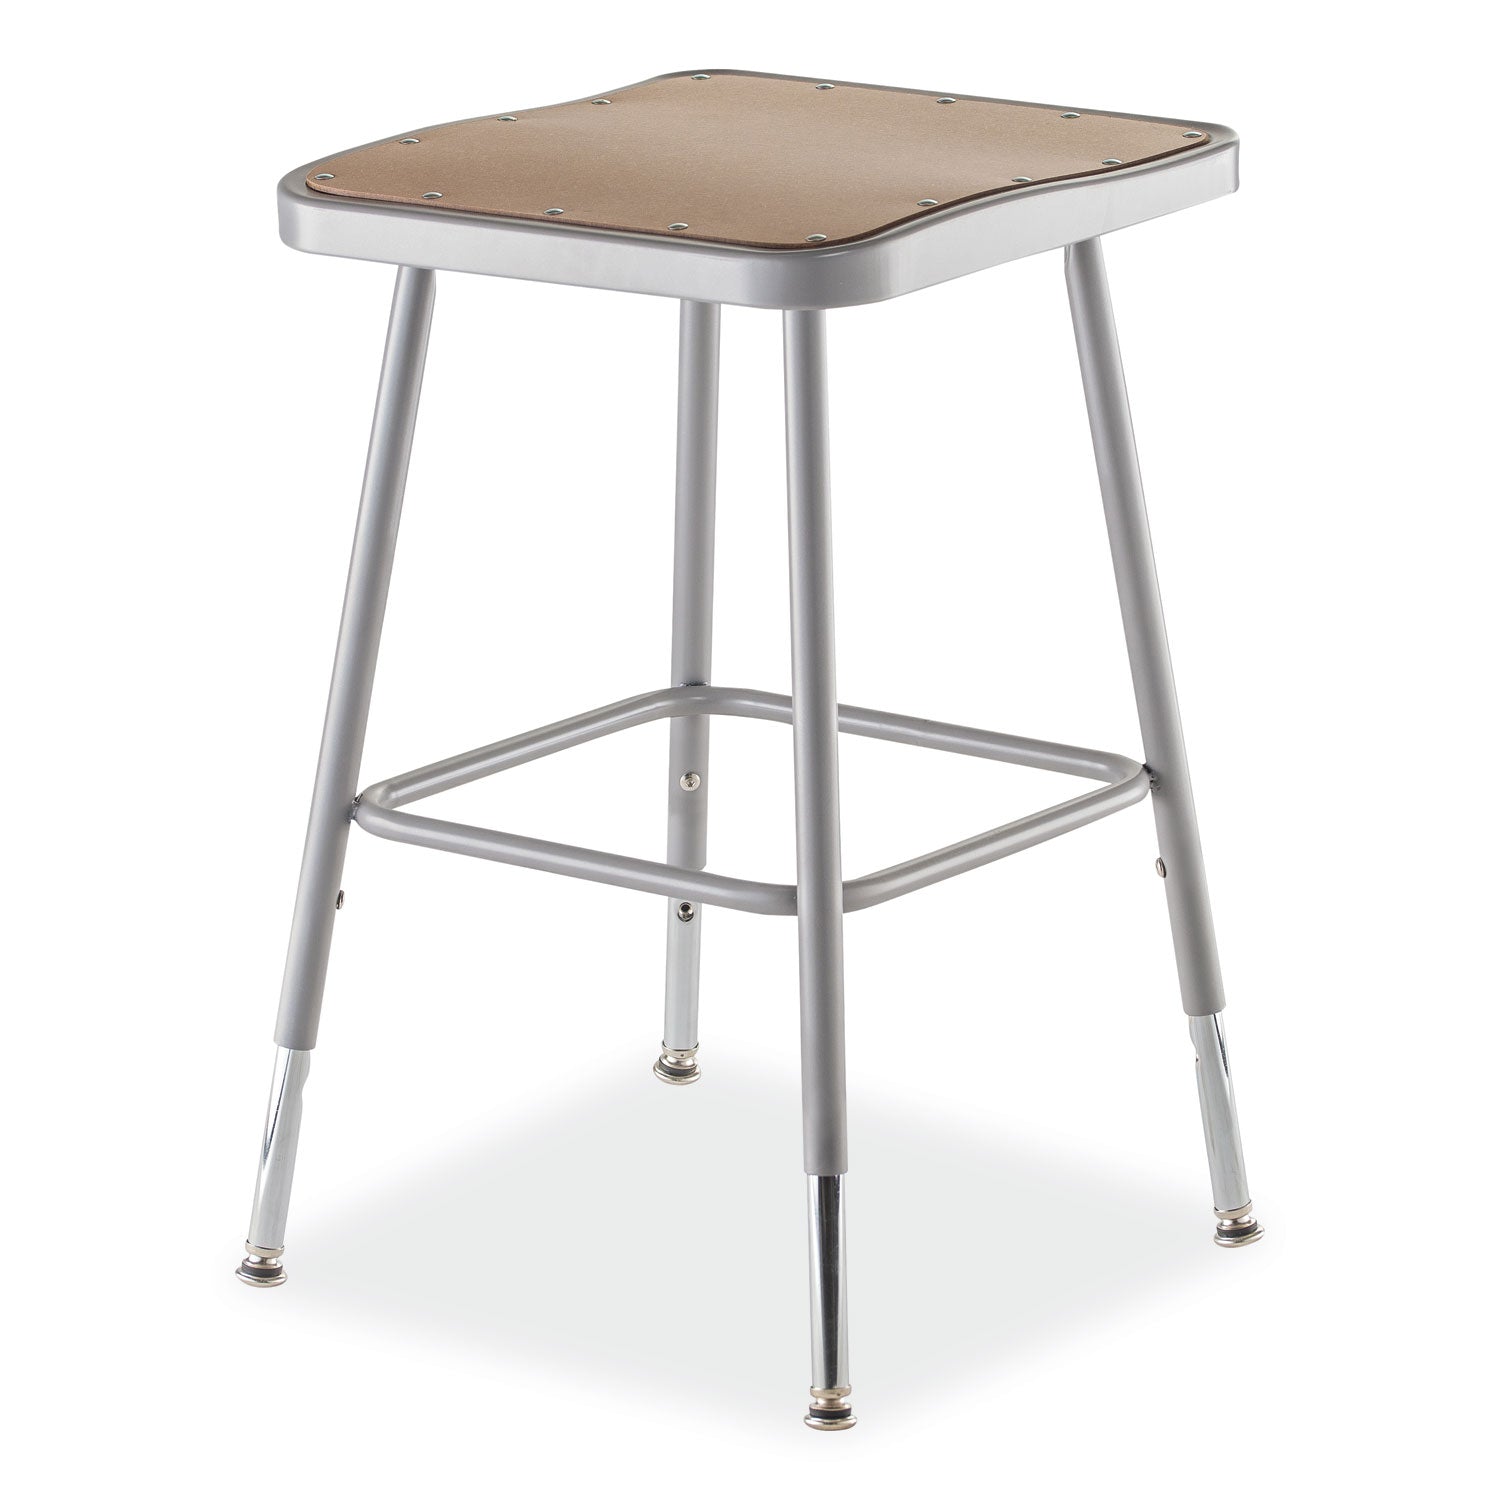 6300-series-height-adj-hd-square-seat-stool-backless-supports-500-lb-18-to-26-seat-ht-brown-gray-ships-in-1-3-bus-days_nps6318h - 1